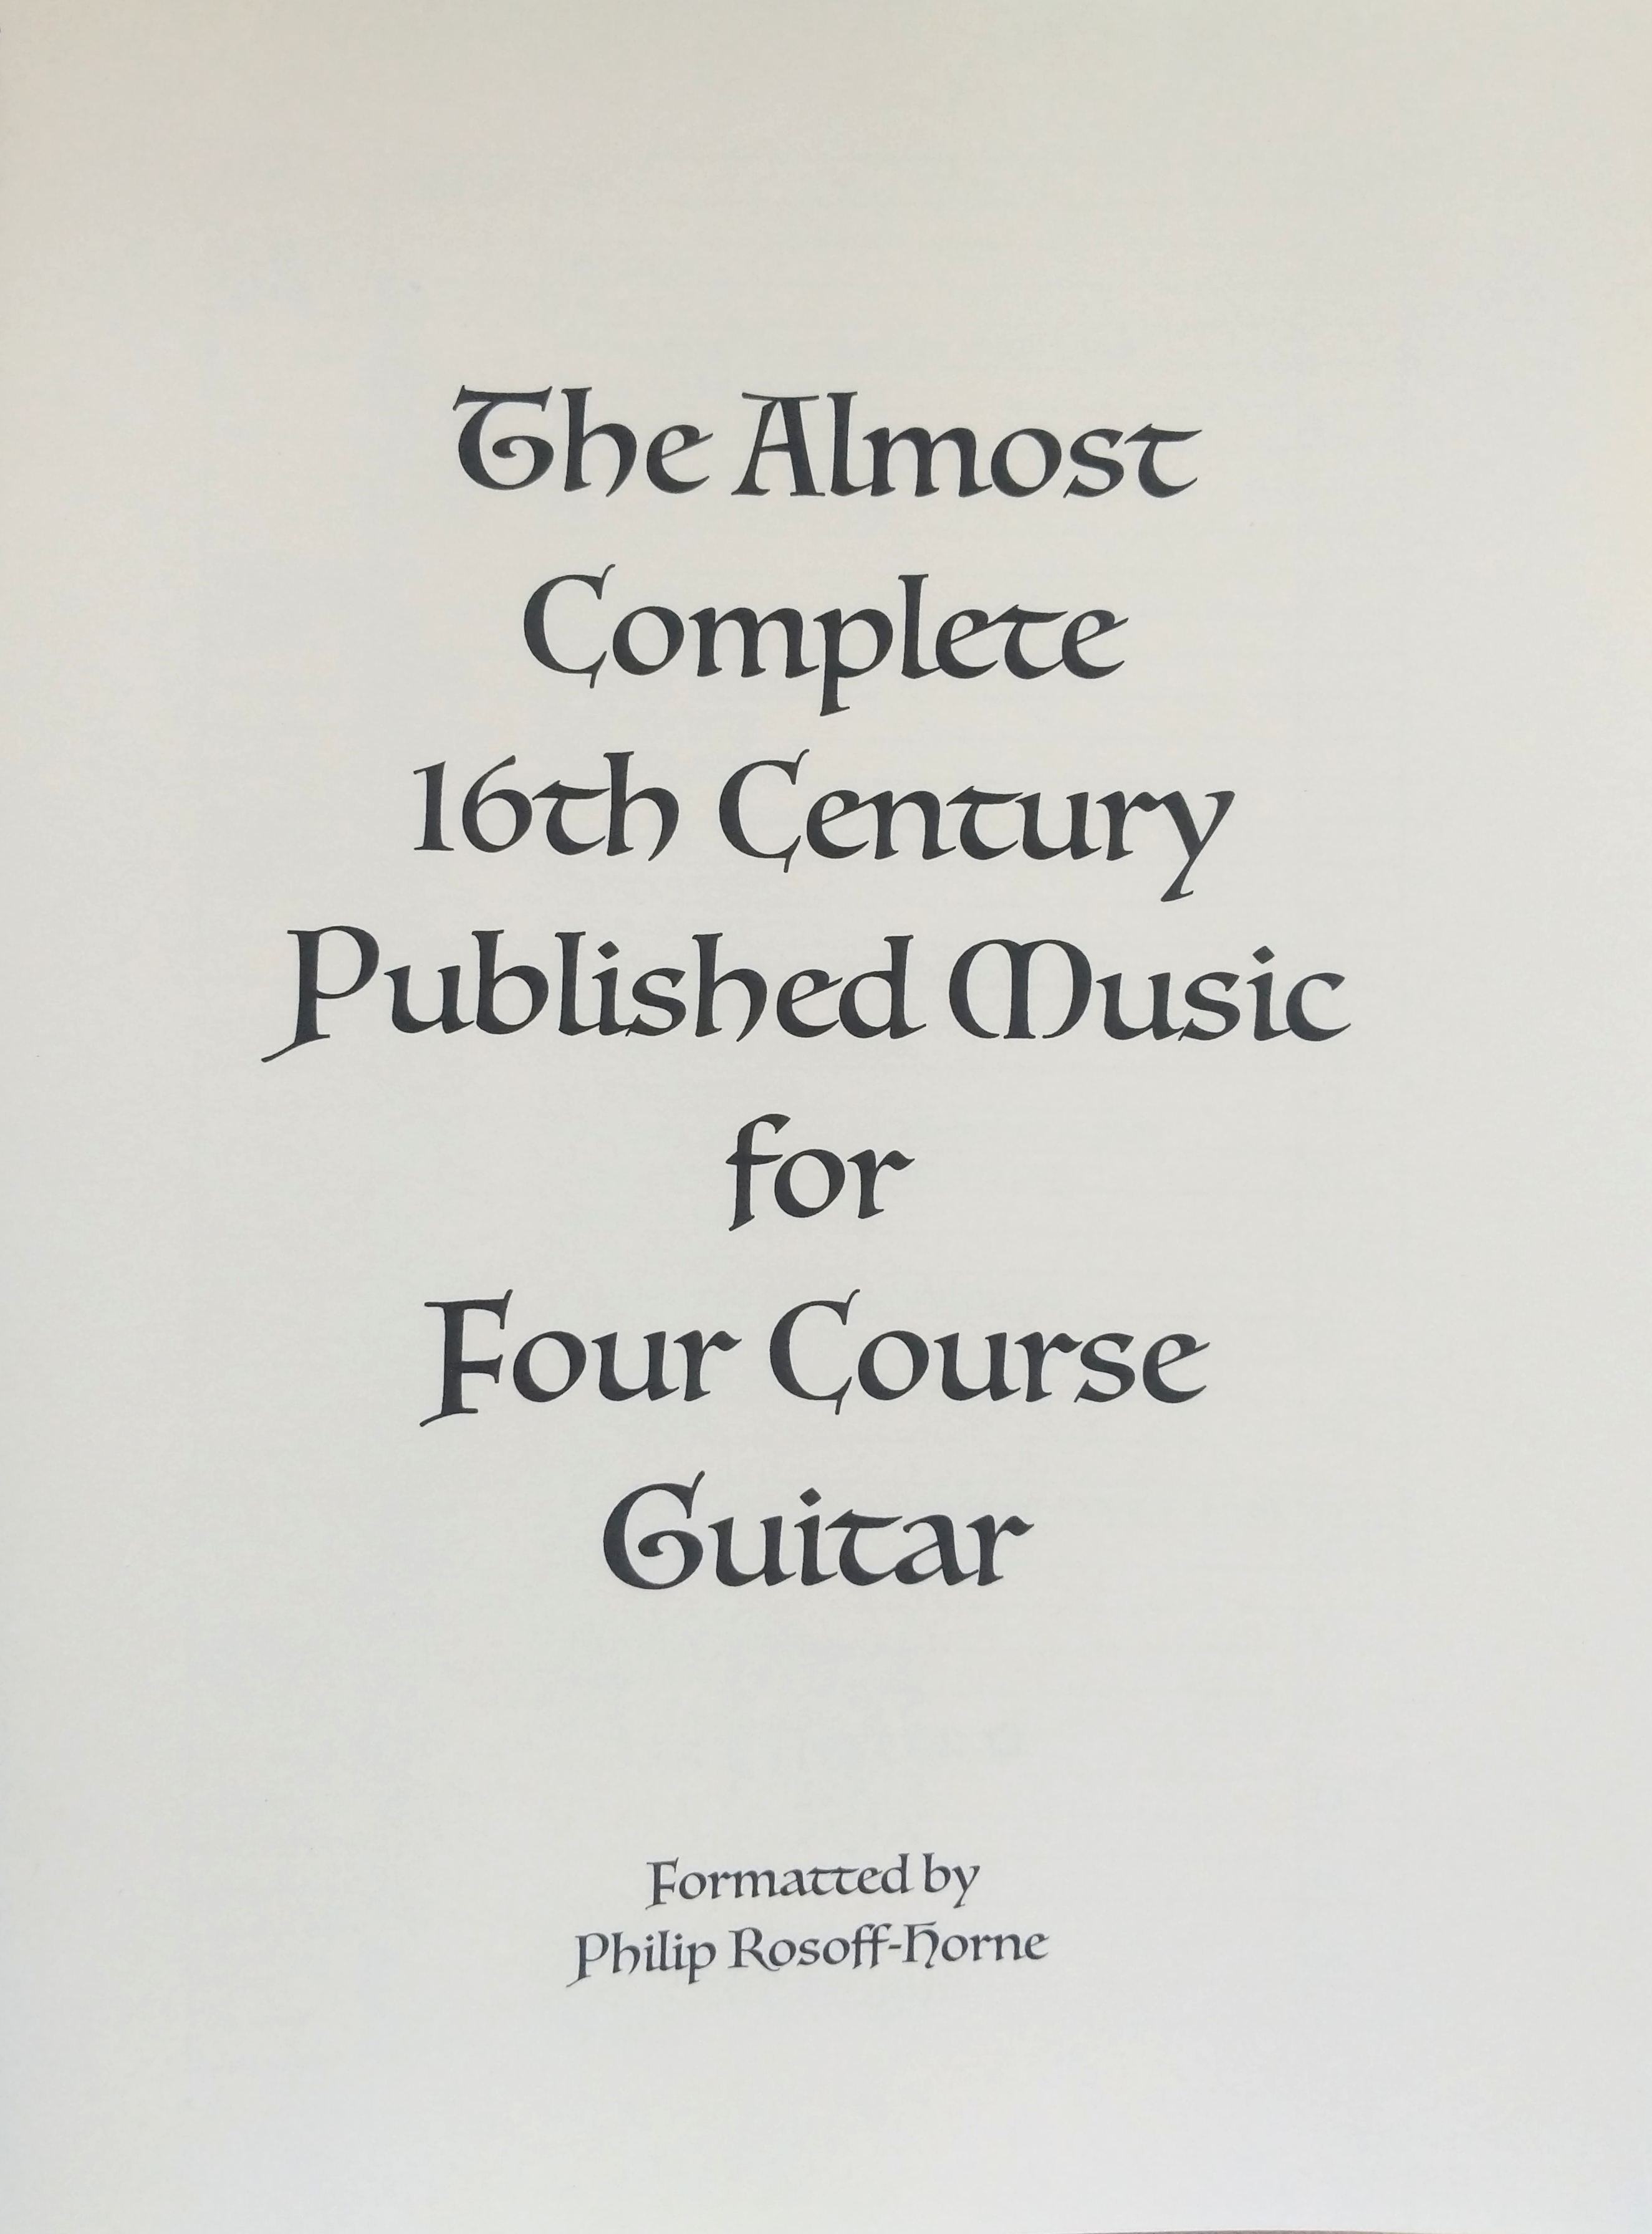 The cover of The Almost Complete 16th Century Published Music for Four Course Guitar